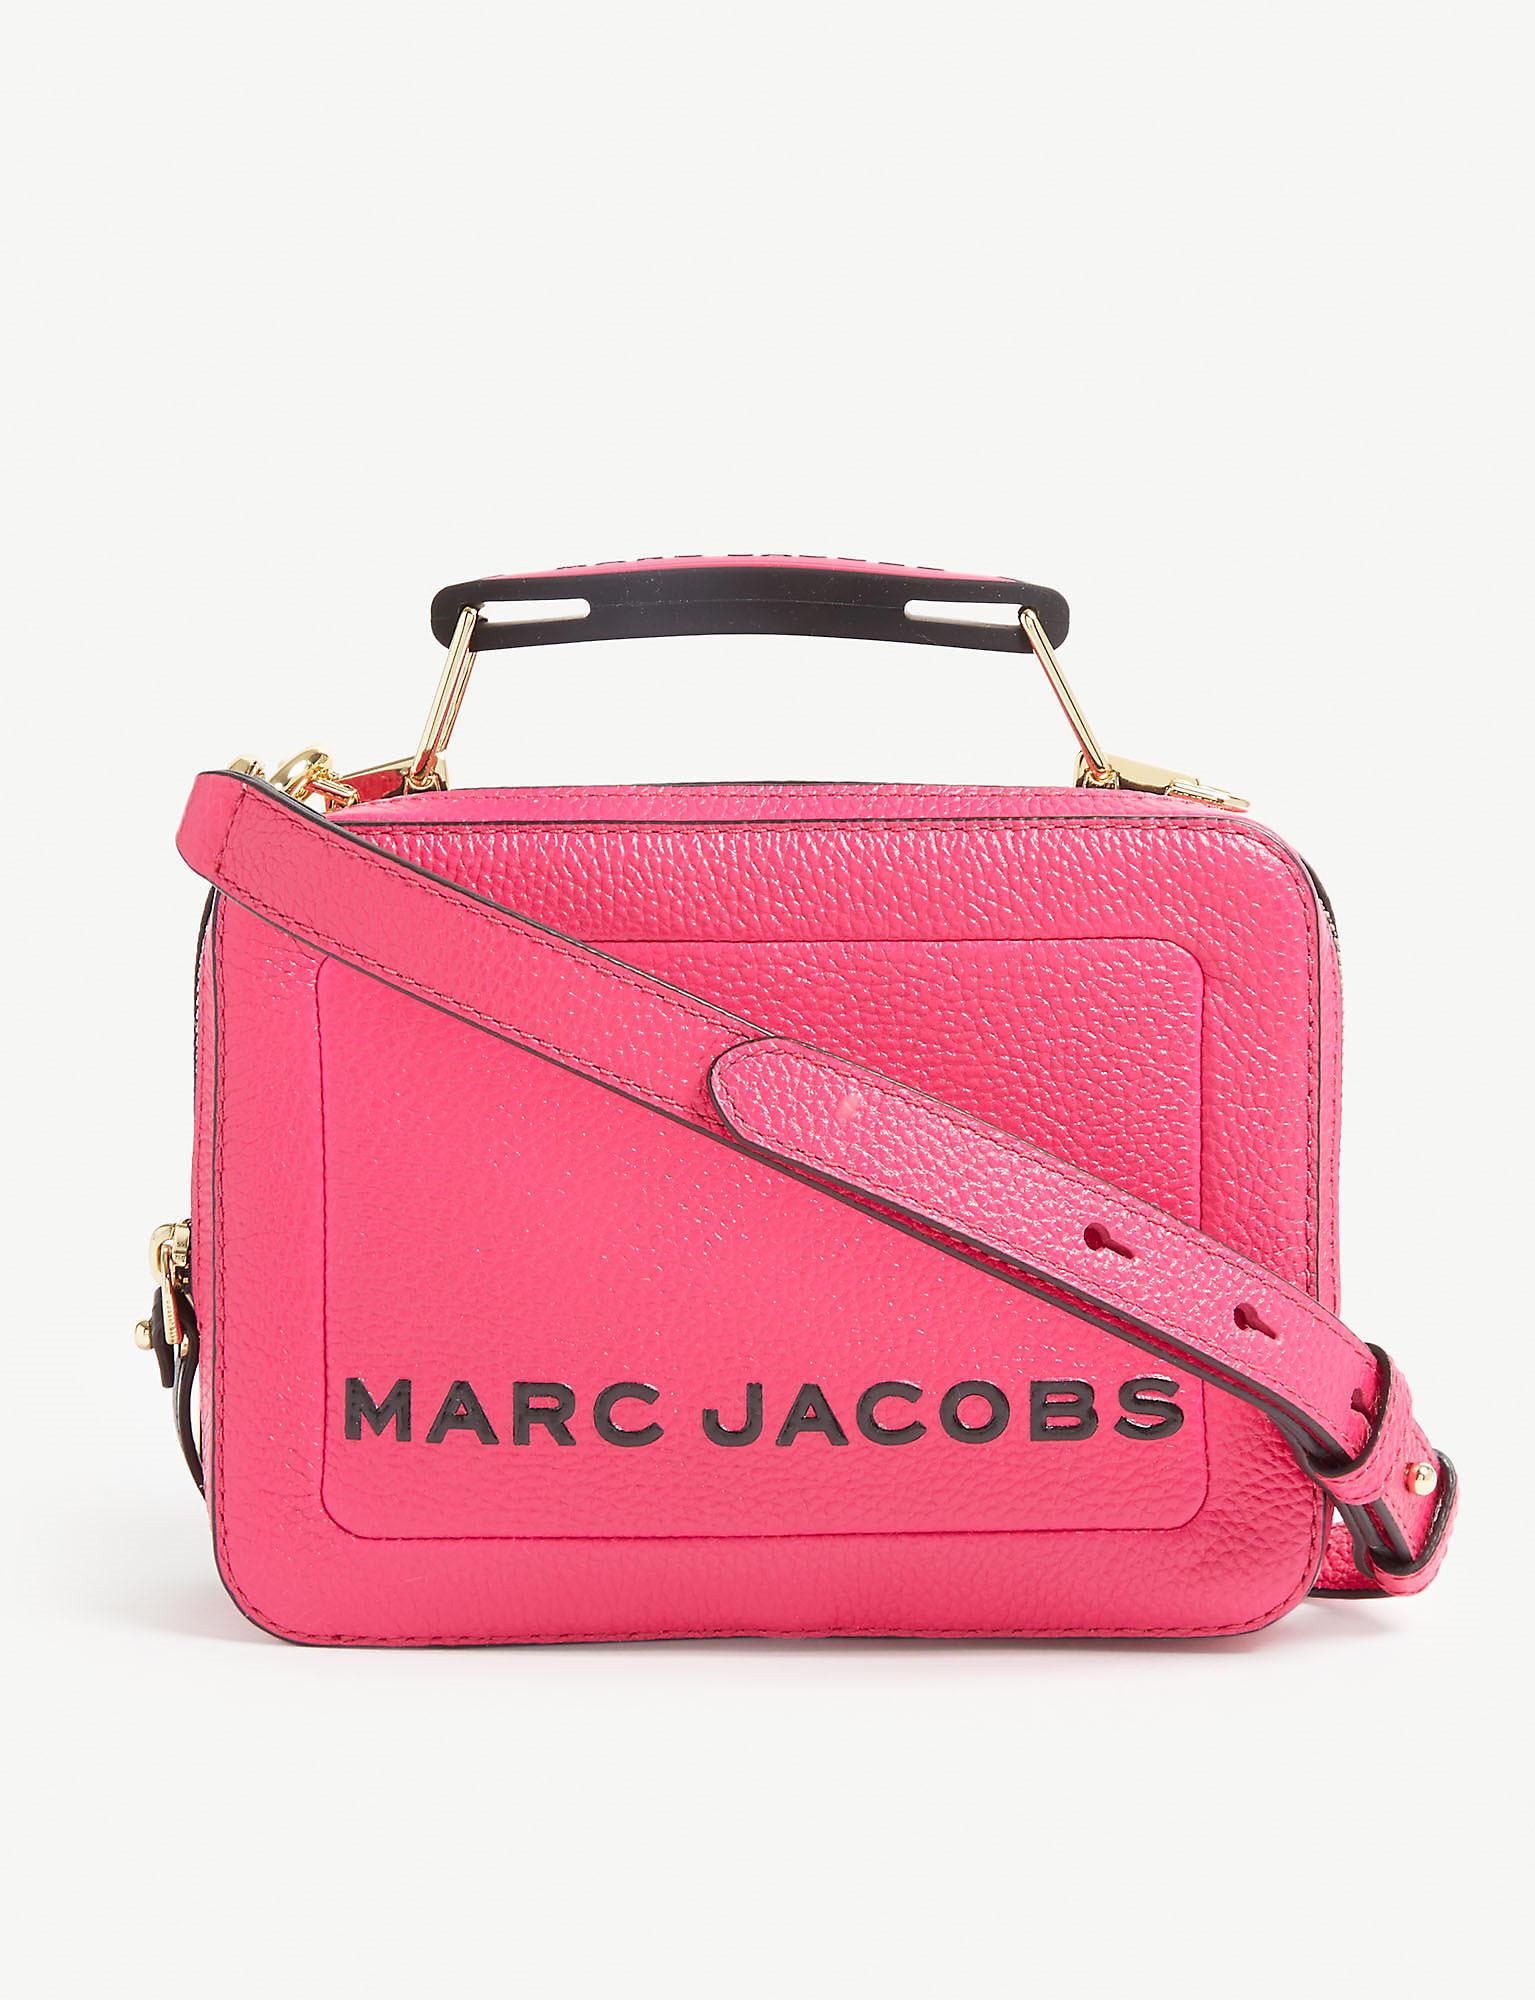 Marc Jacobs The Box Bag Leather Cross-body Bag in Pink - Lyst